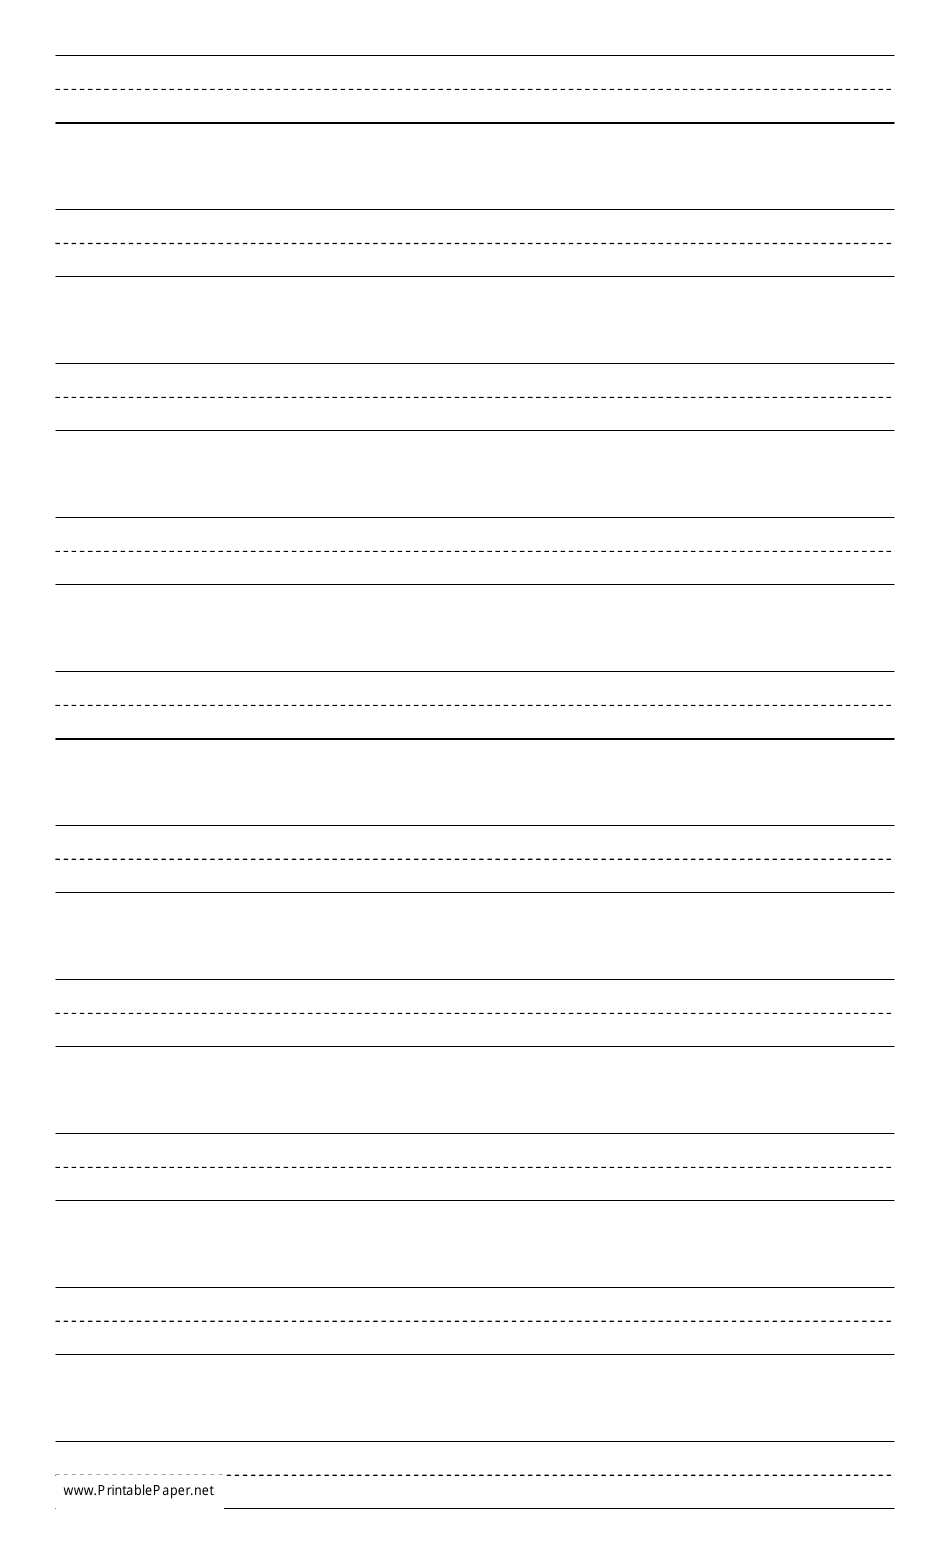 Three-Lined Paper template image preview – A blank three-lined paper document.